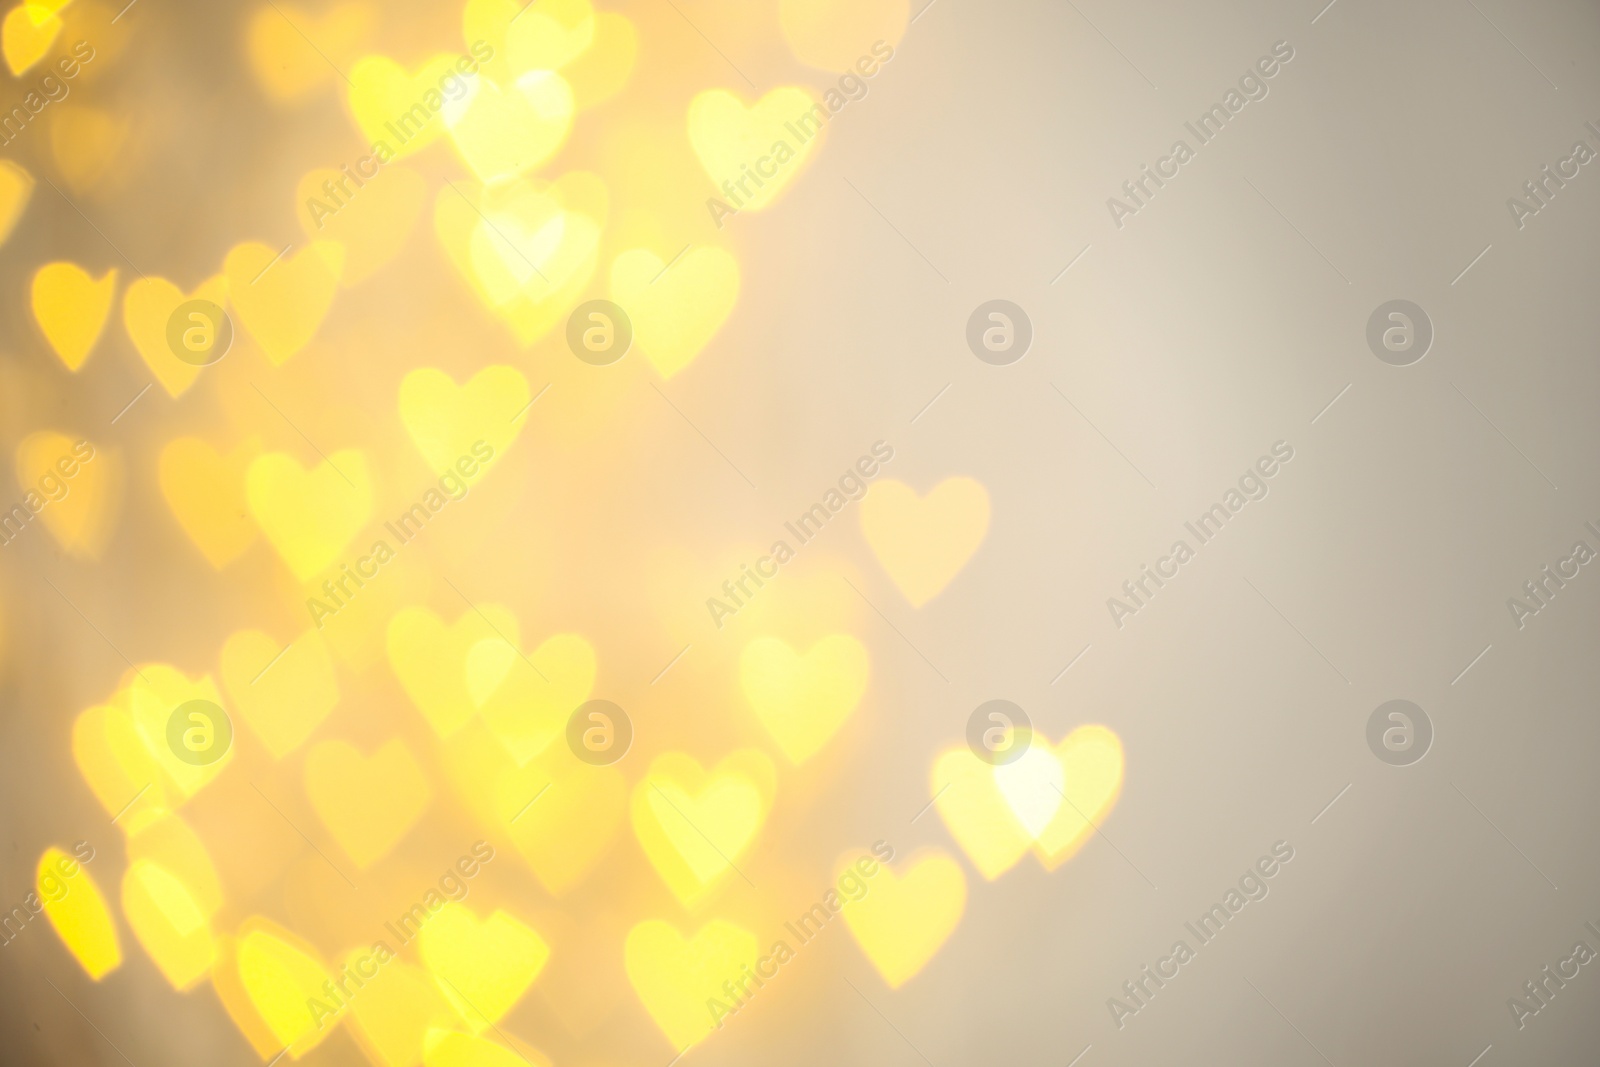 Photo of Blurred view of gold heart shaped lights on light background